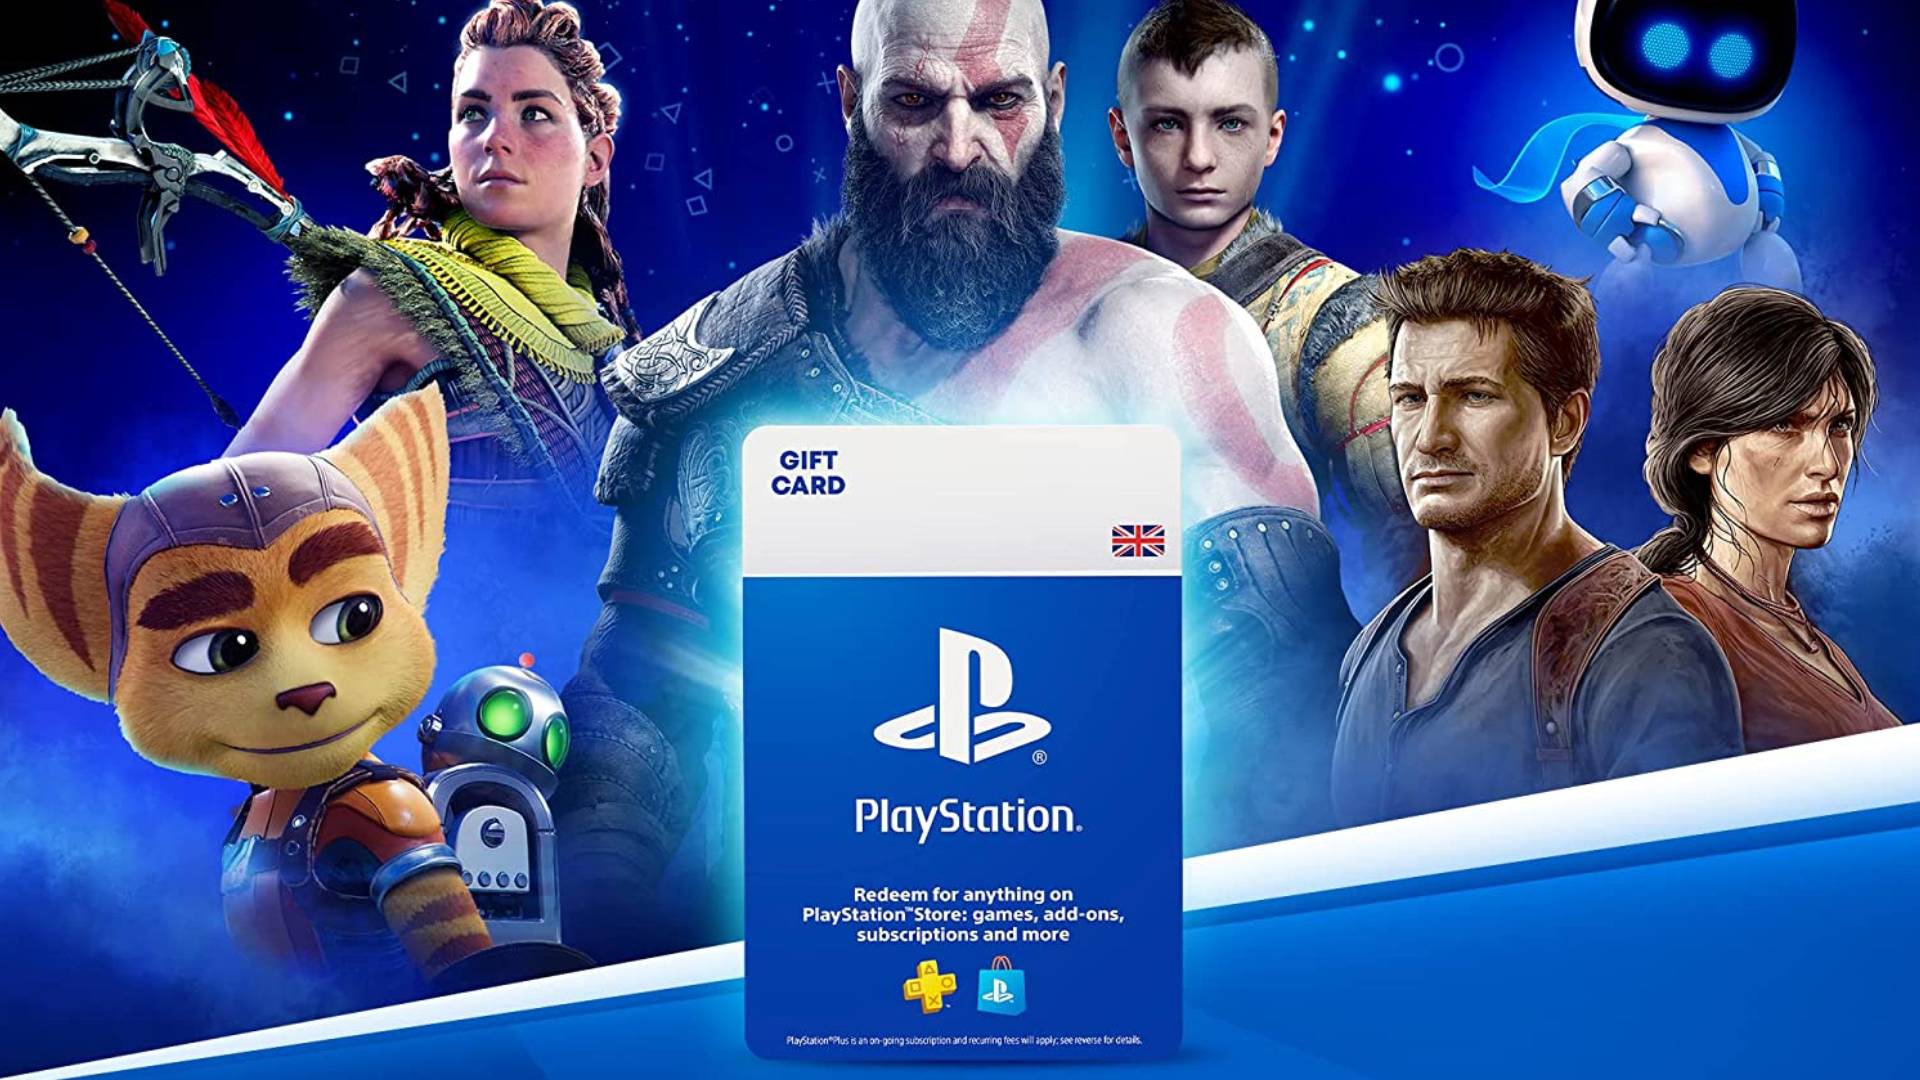 Key art of the PlayStation gift cards